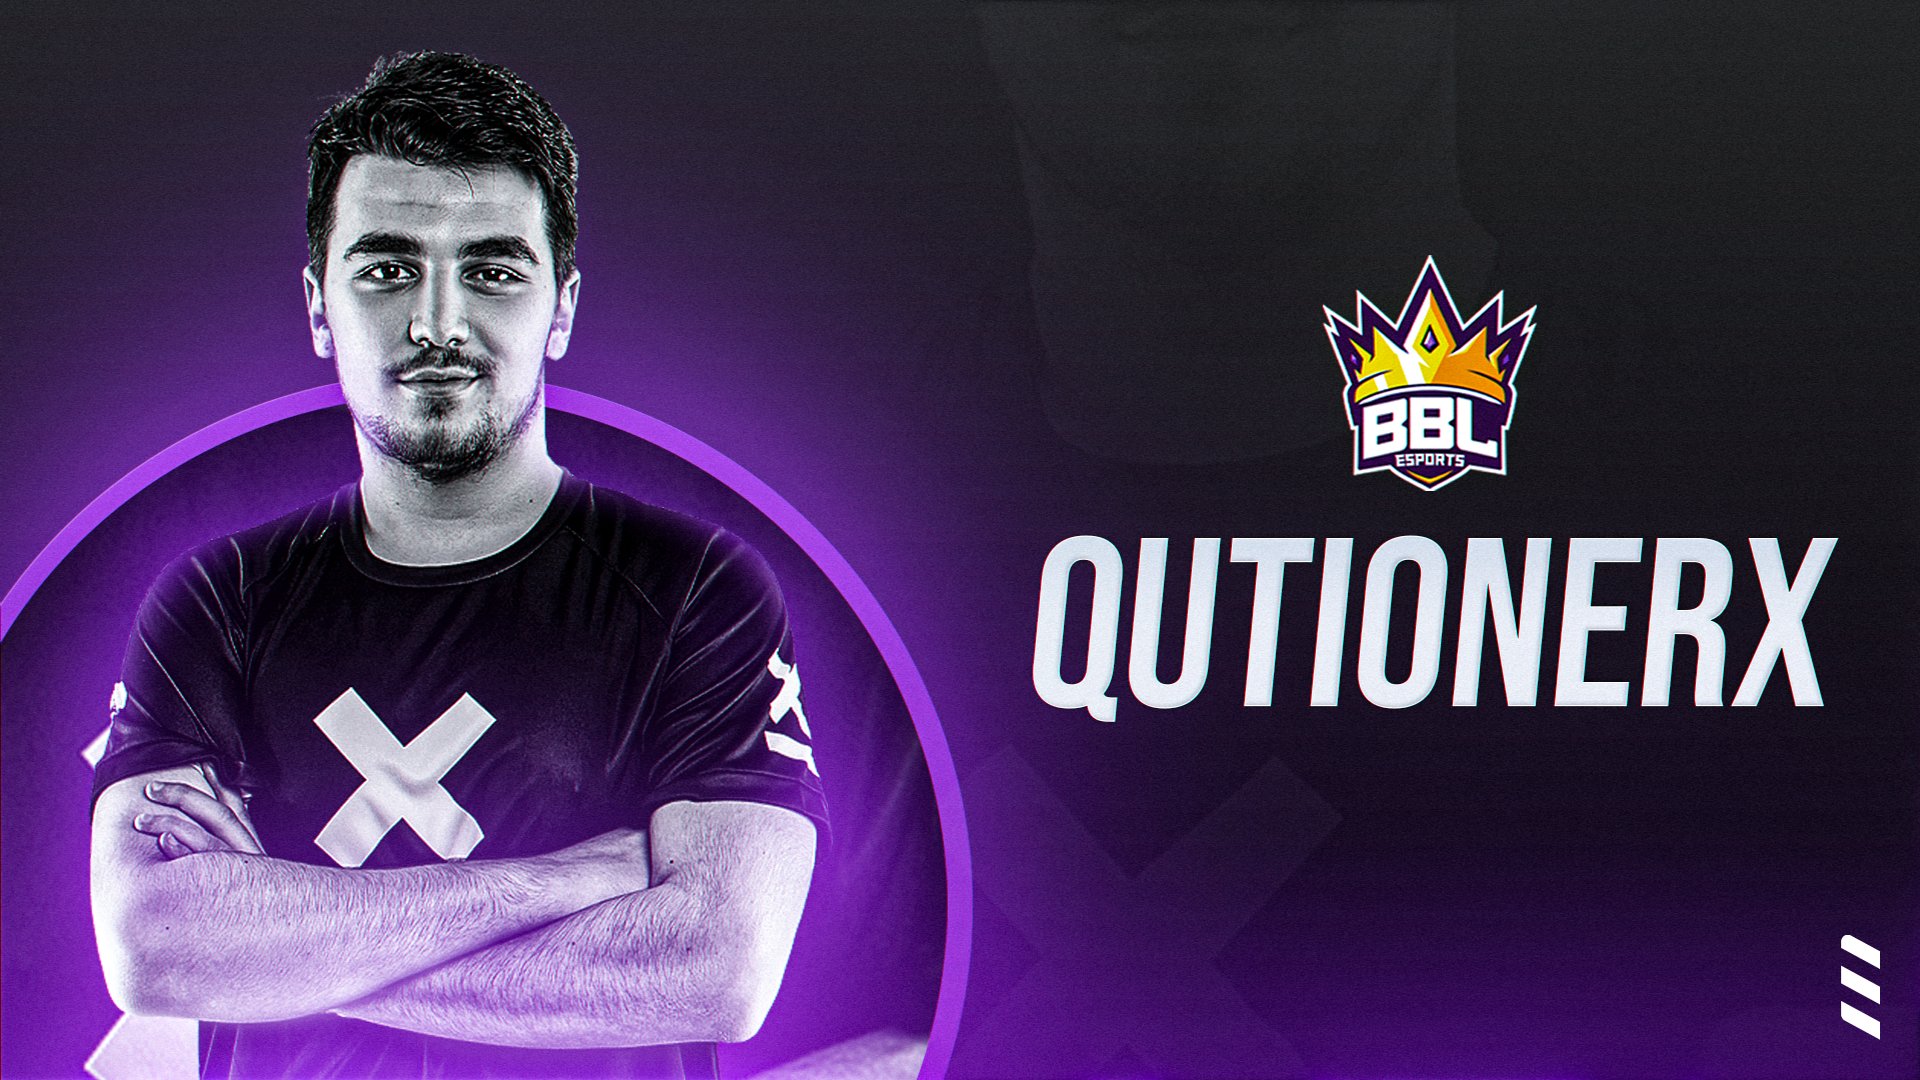 bbl's qutionerx talks about the guild series and its next rivals